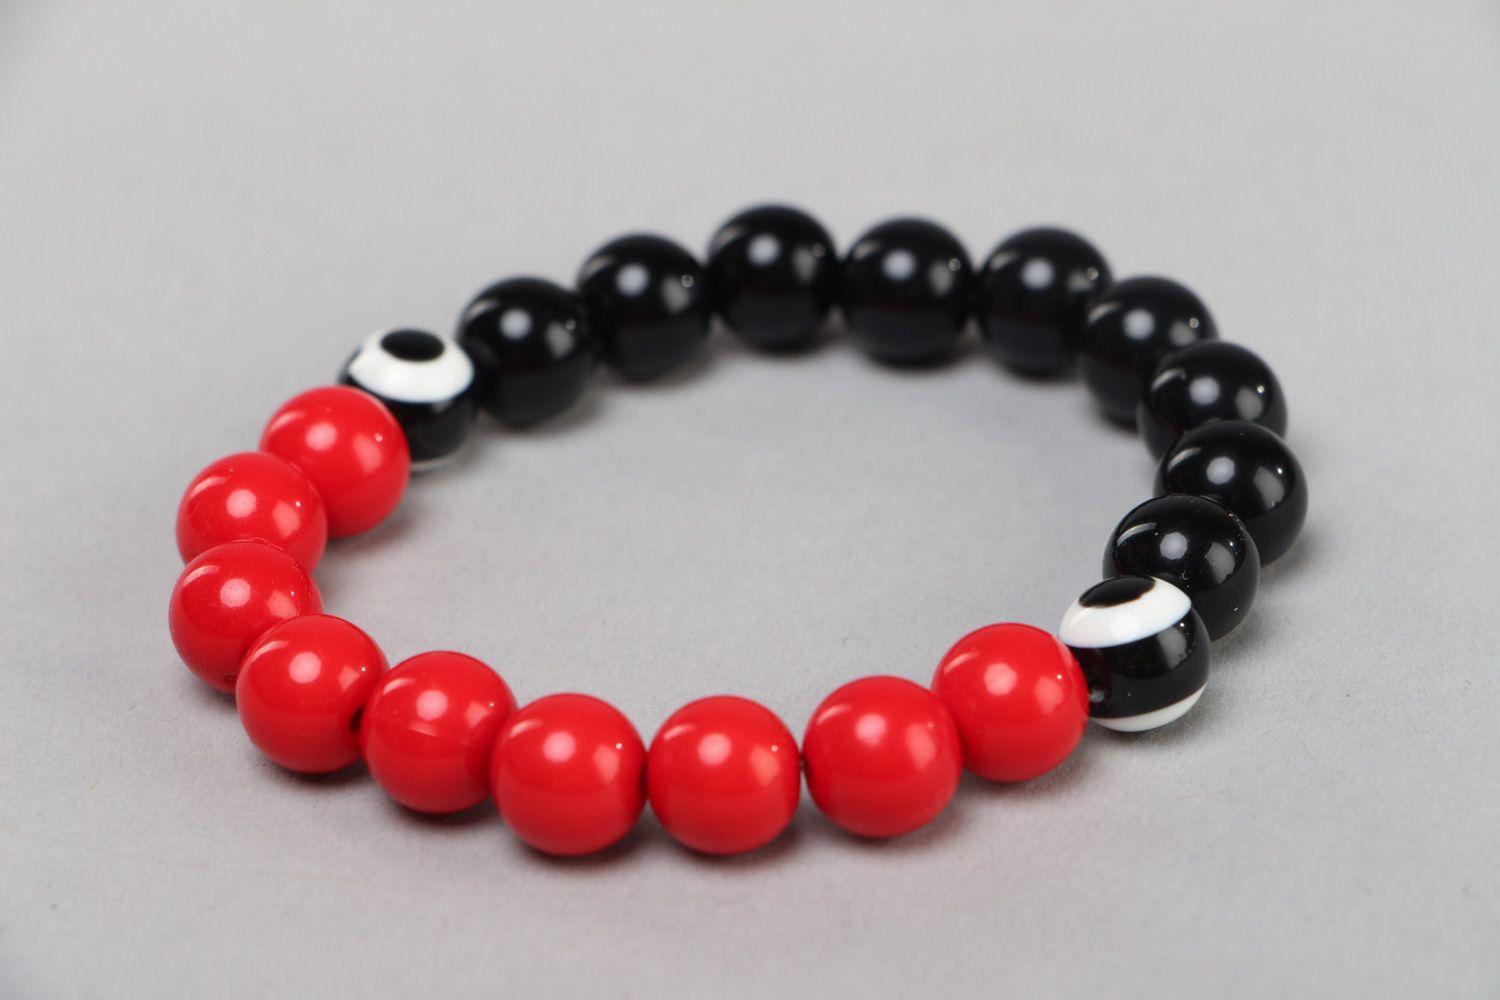 Handmade stretch wrist bracelet with red and black plastic beads for women photo 1